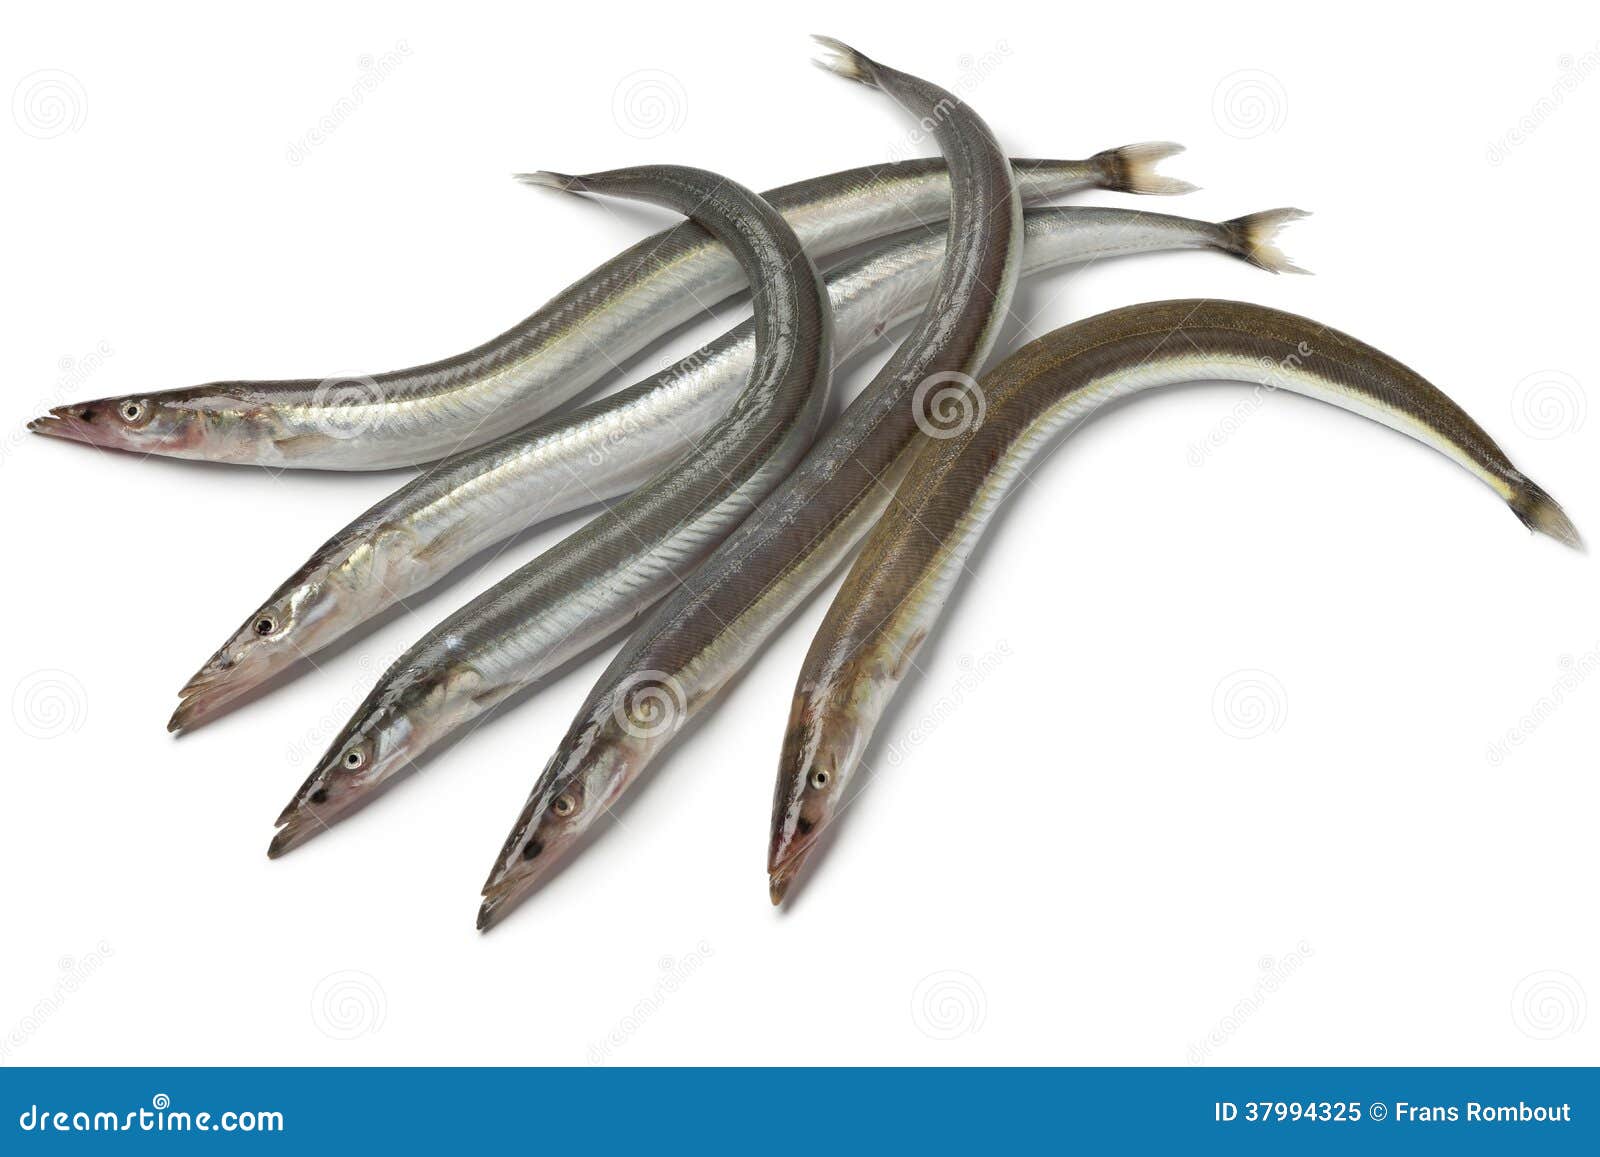 Lesser sand eels stock image. Image of sand, healthy - 37994325